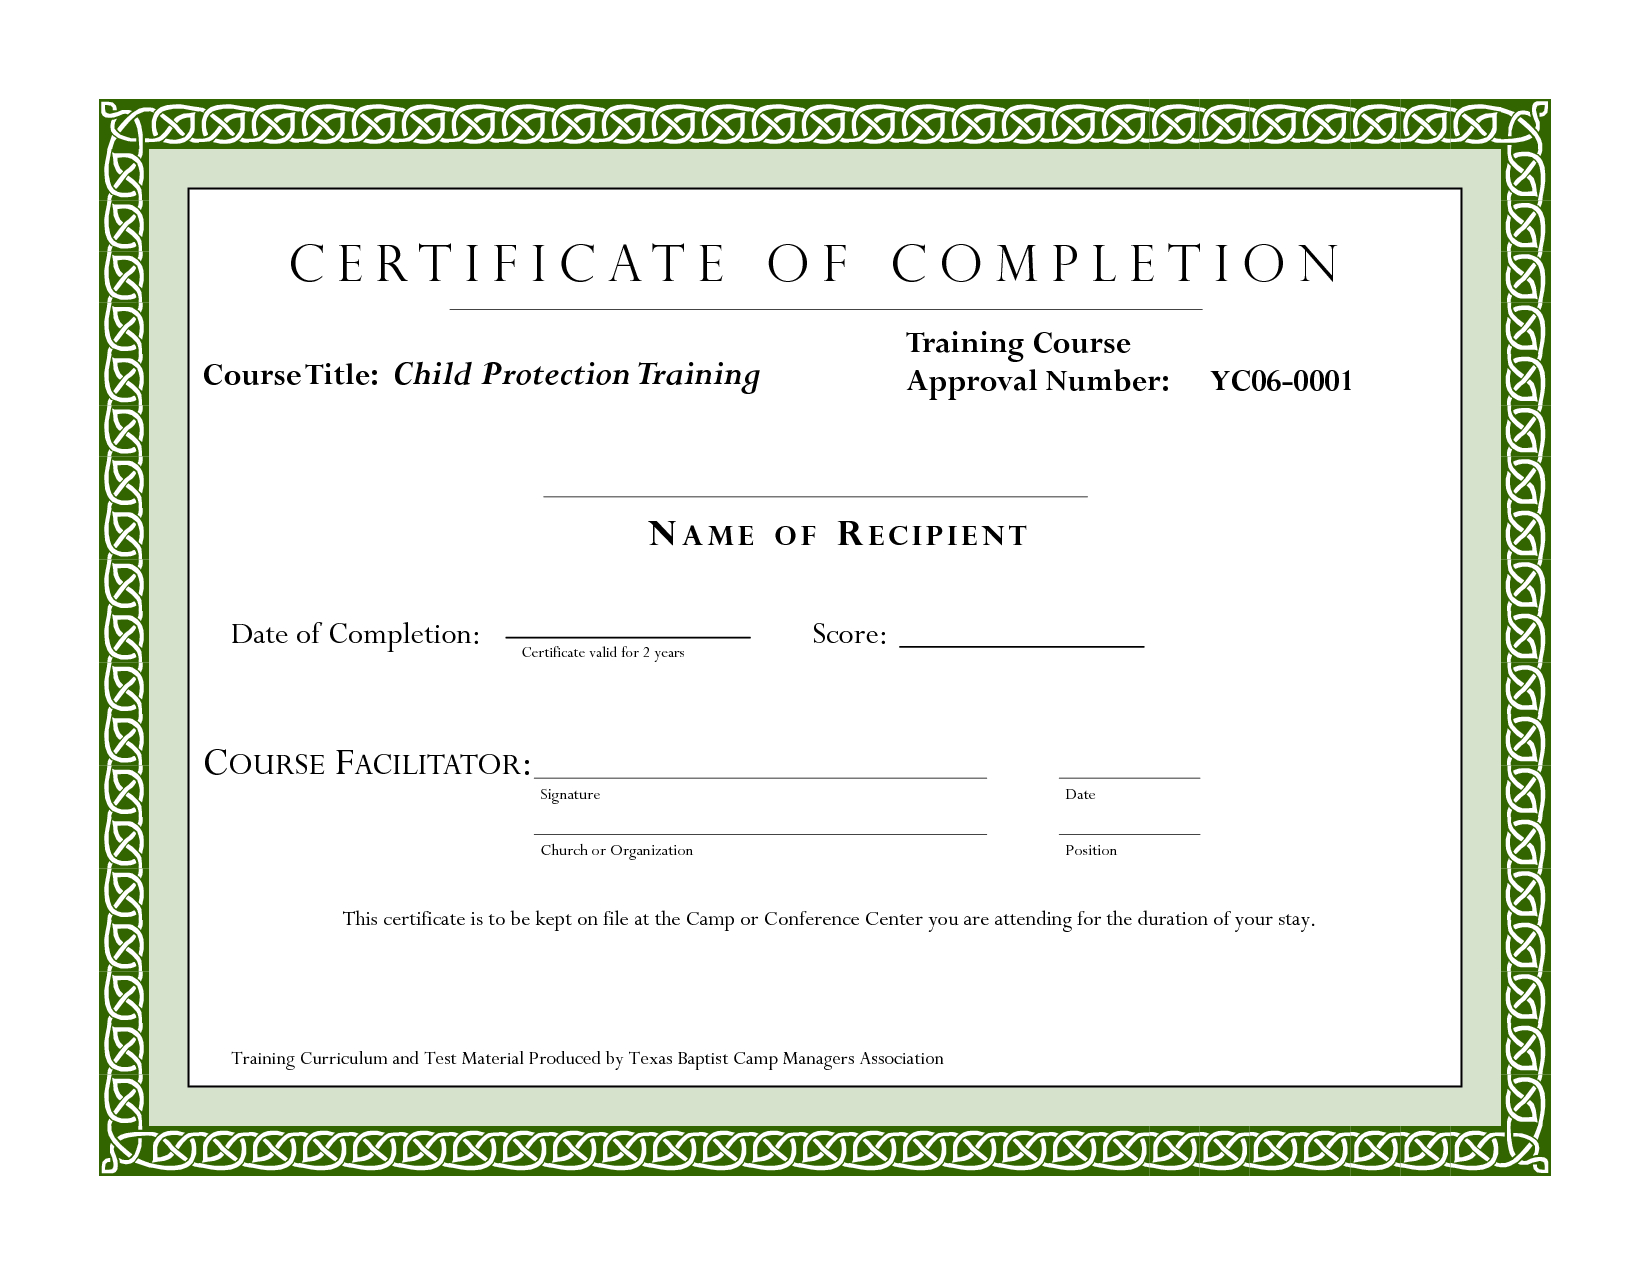 005 Certificate Of Completion Template Fantastic Ideas With Construction Certificate Of Completion Template